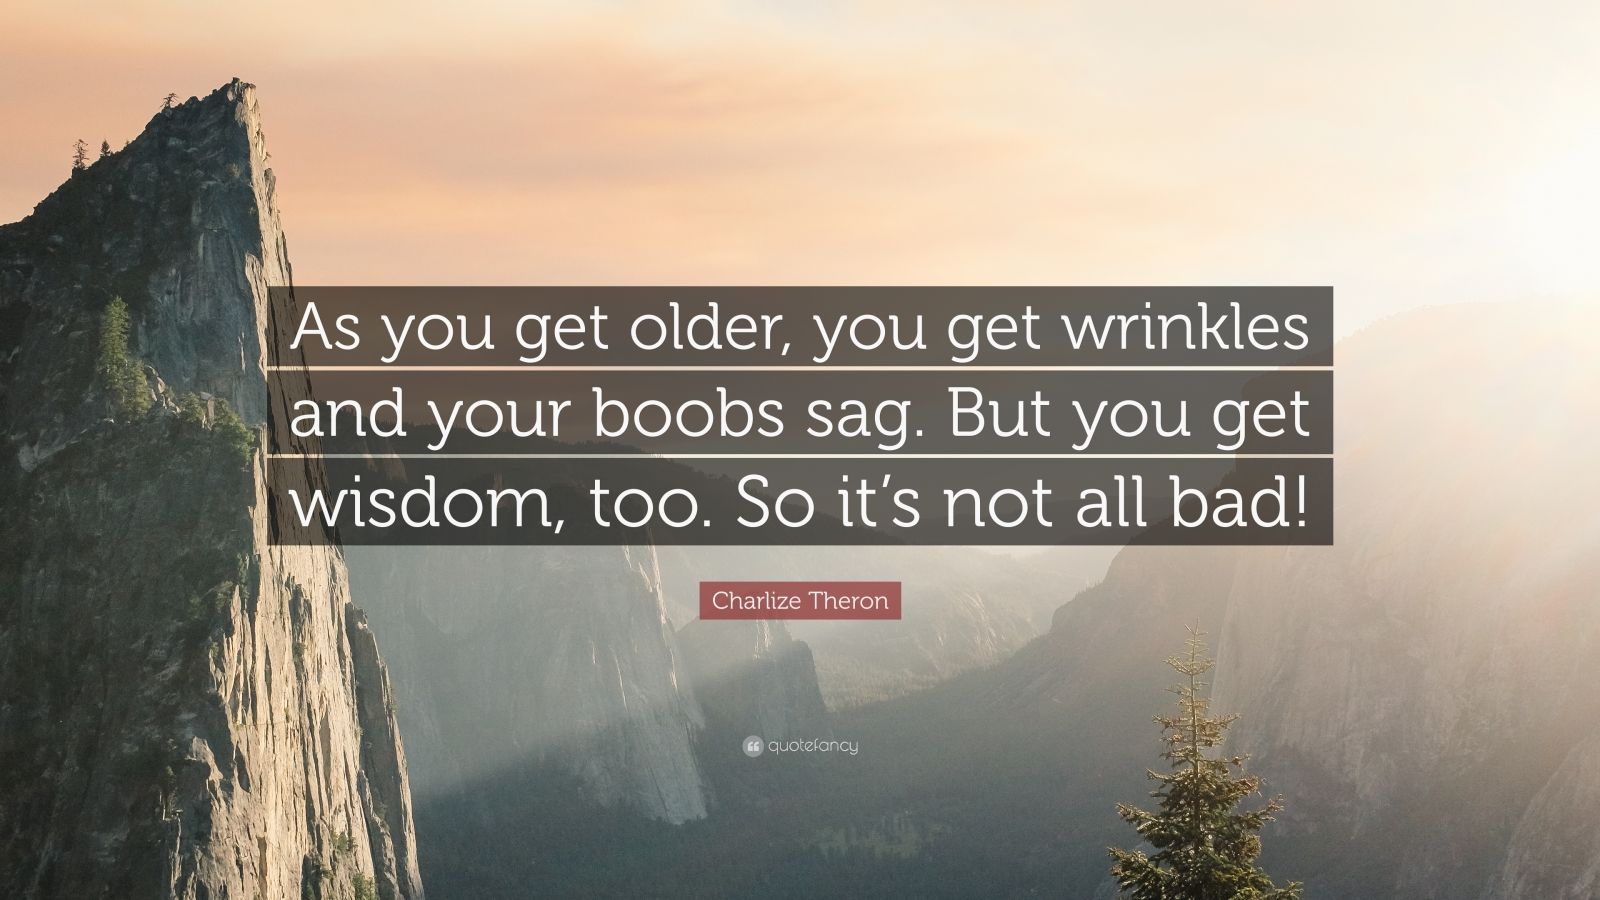 D'Arcy Wentworth Thompson Quote: “Sagging wrinkles, hanging breasts and  many another sign of age are